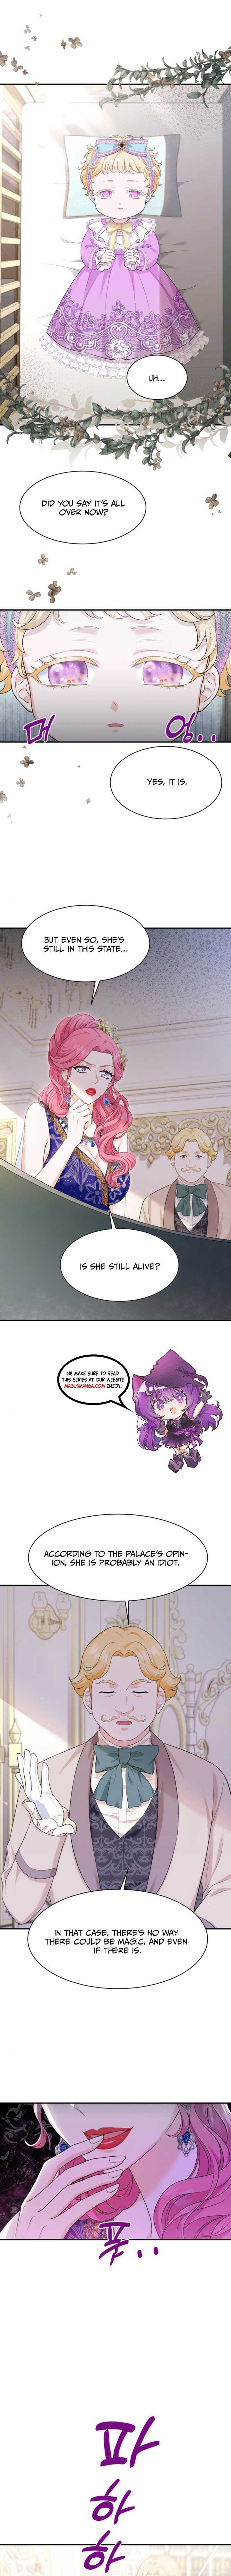 The S-Class Little Princess Is Too Strong - Page 2